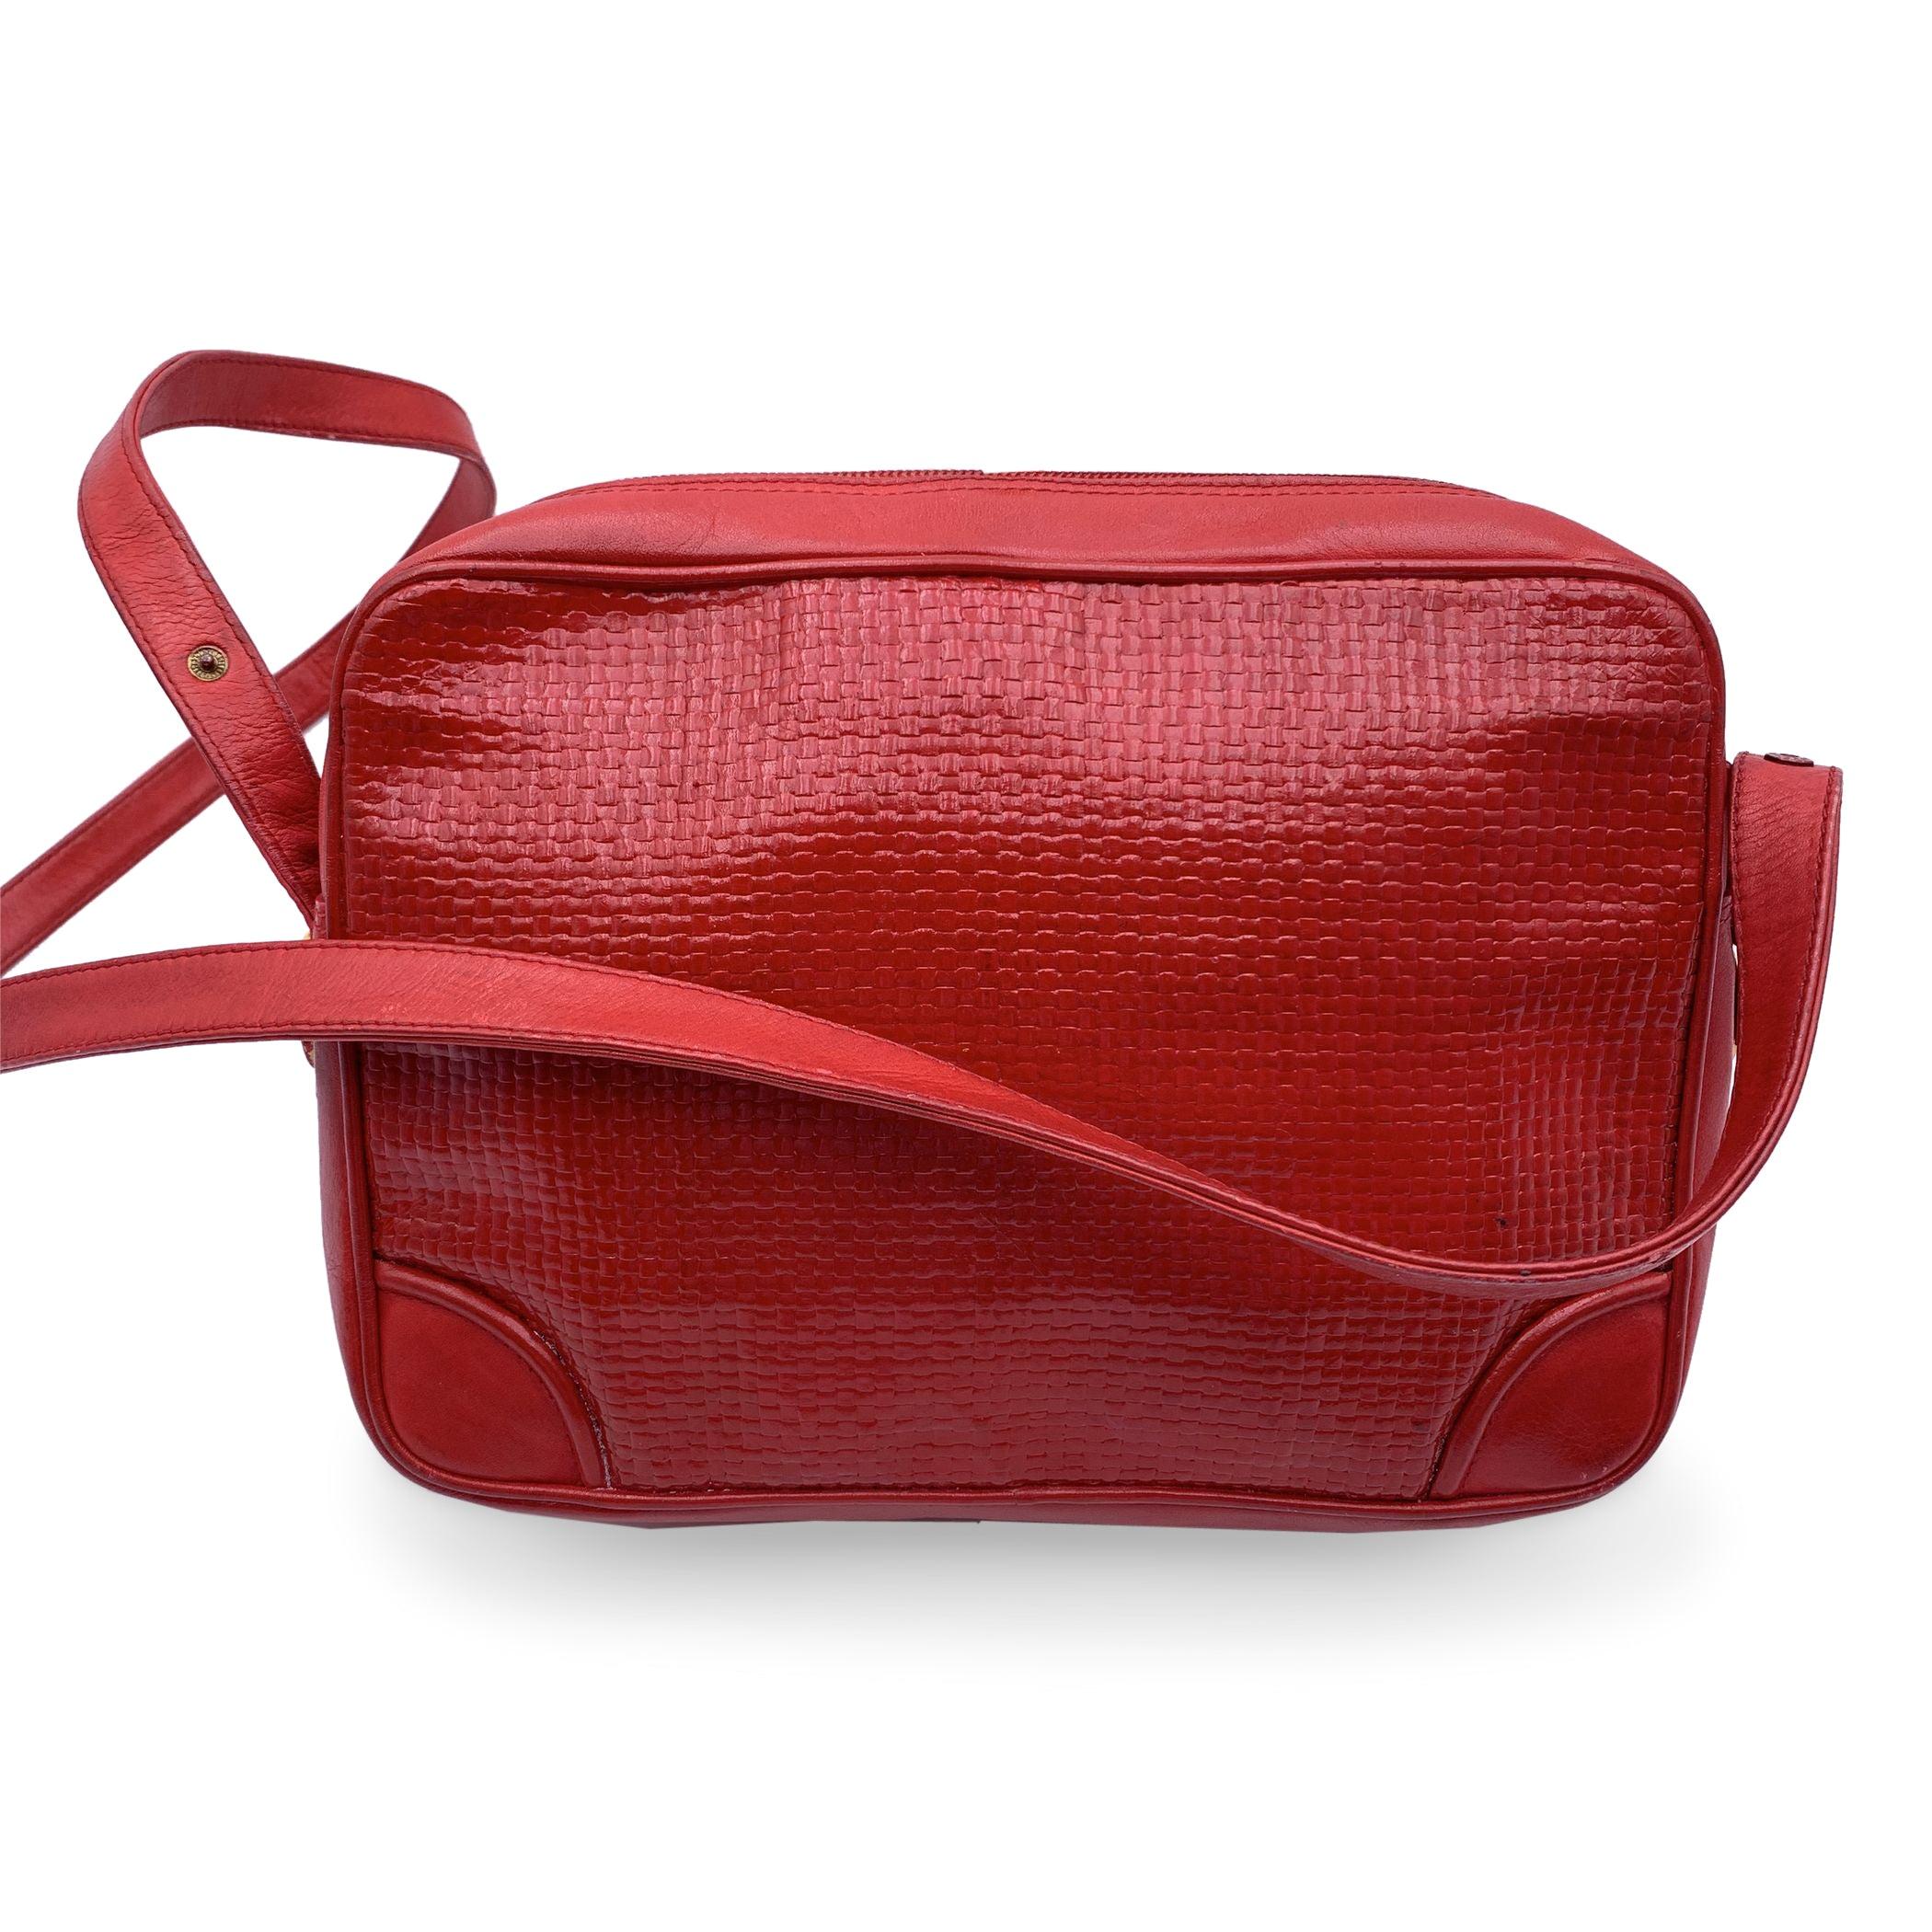 Gucci Vintage Red Textured Leather Shoulder Messenger Bag In Good Condition For Sale In Rome, Rome